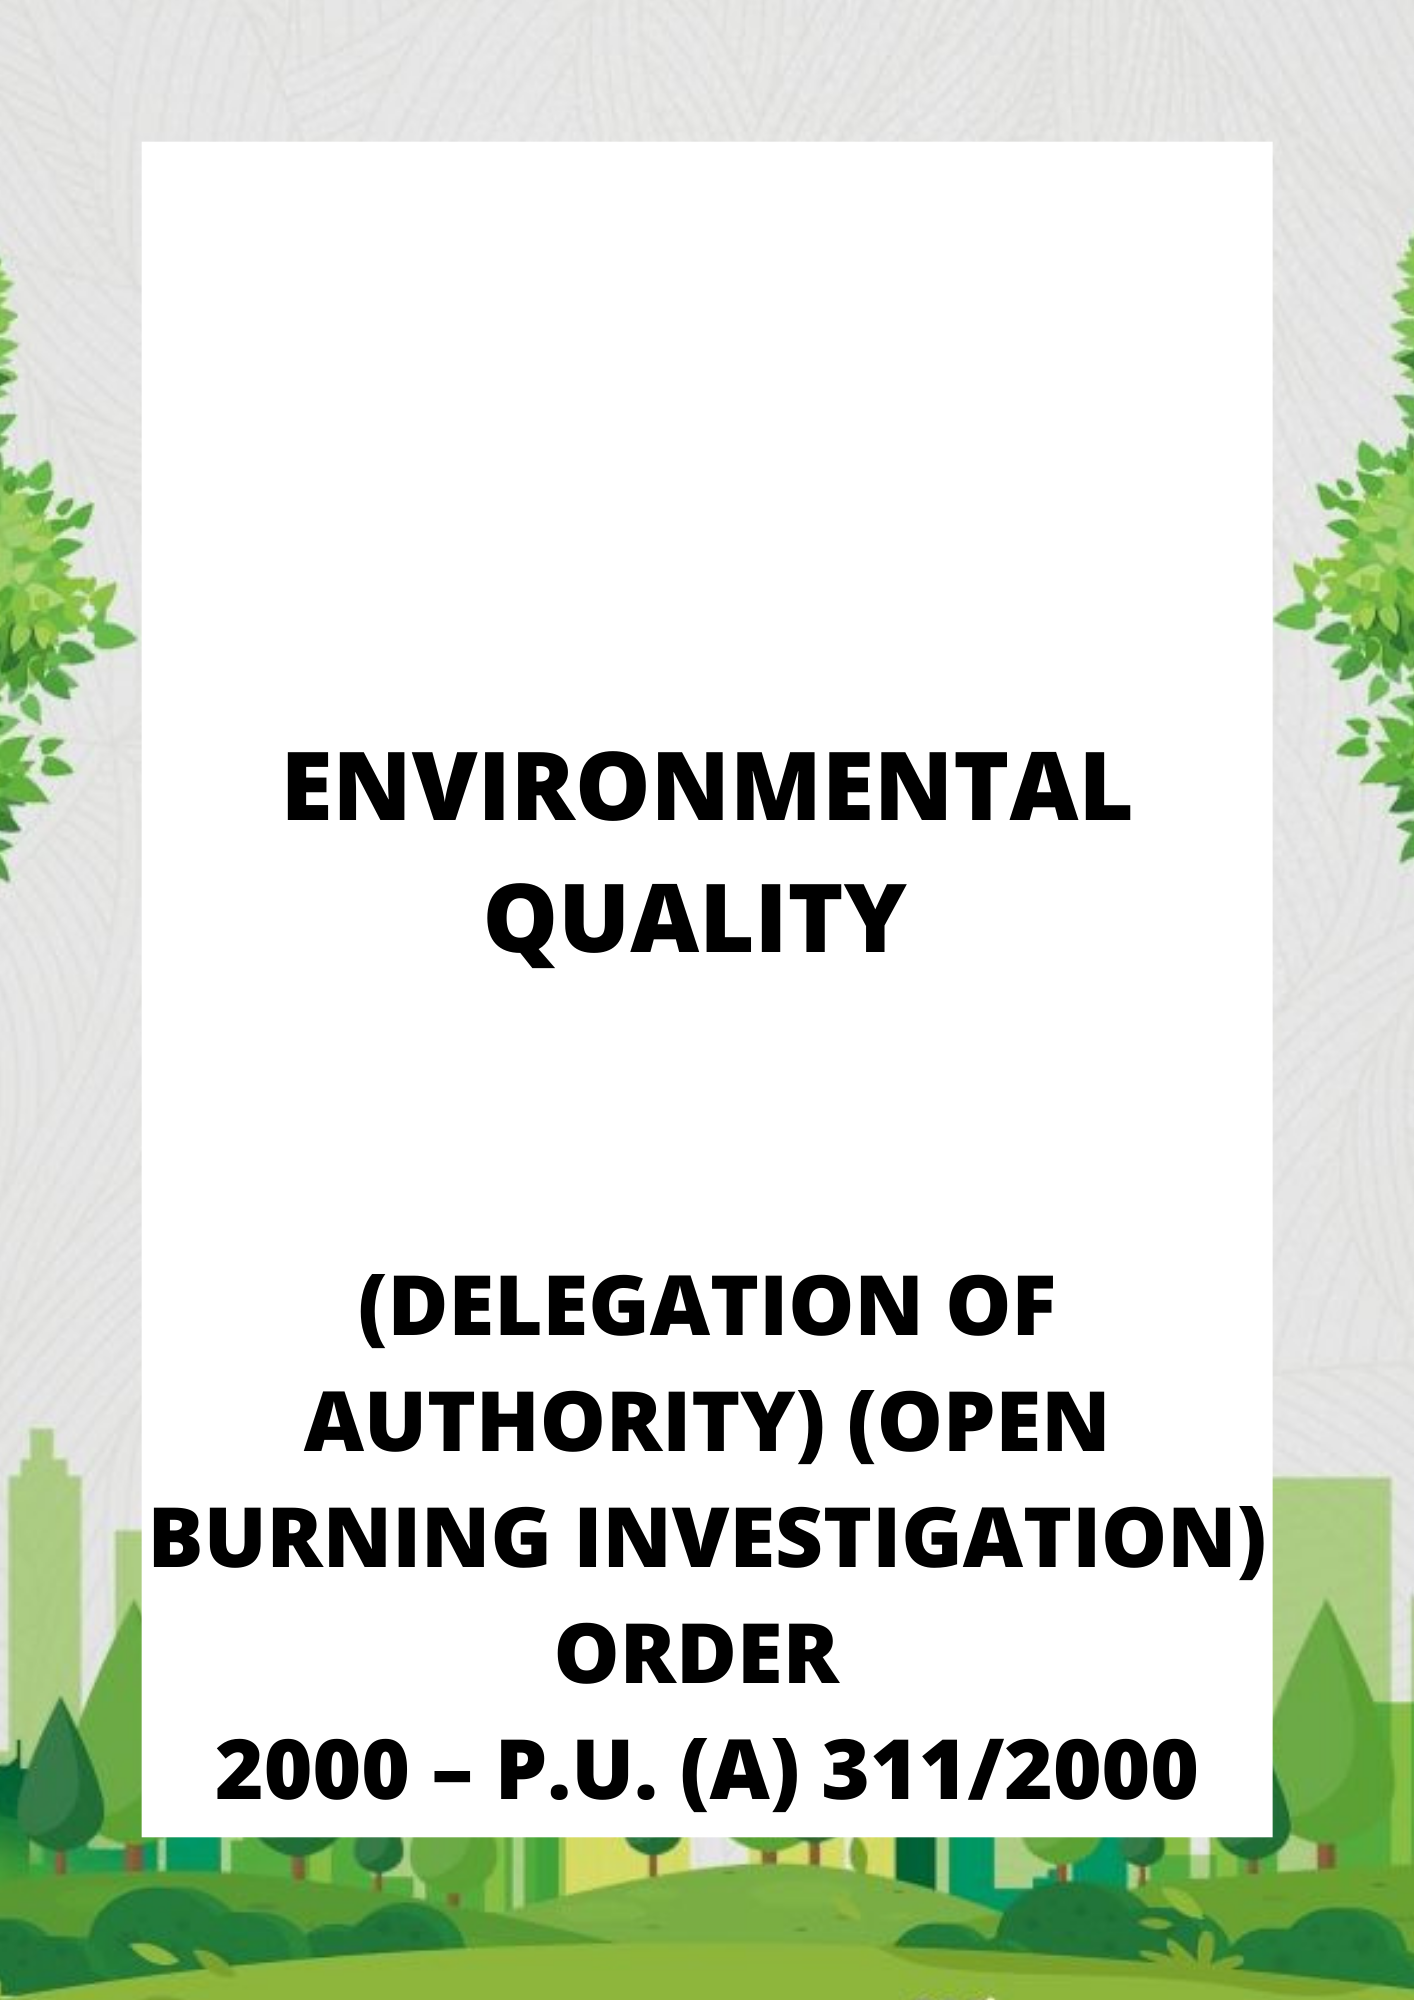 Environmental Quality (Delegation of Authority) (Open Burning Investigation) Order 2000 – P.U. (A) 3112000